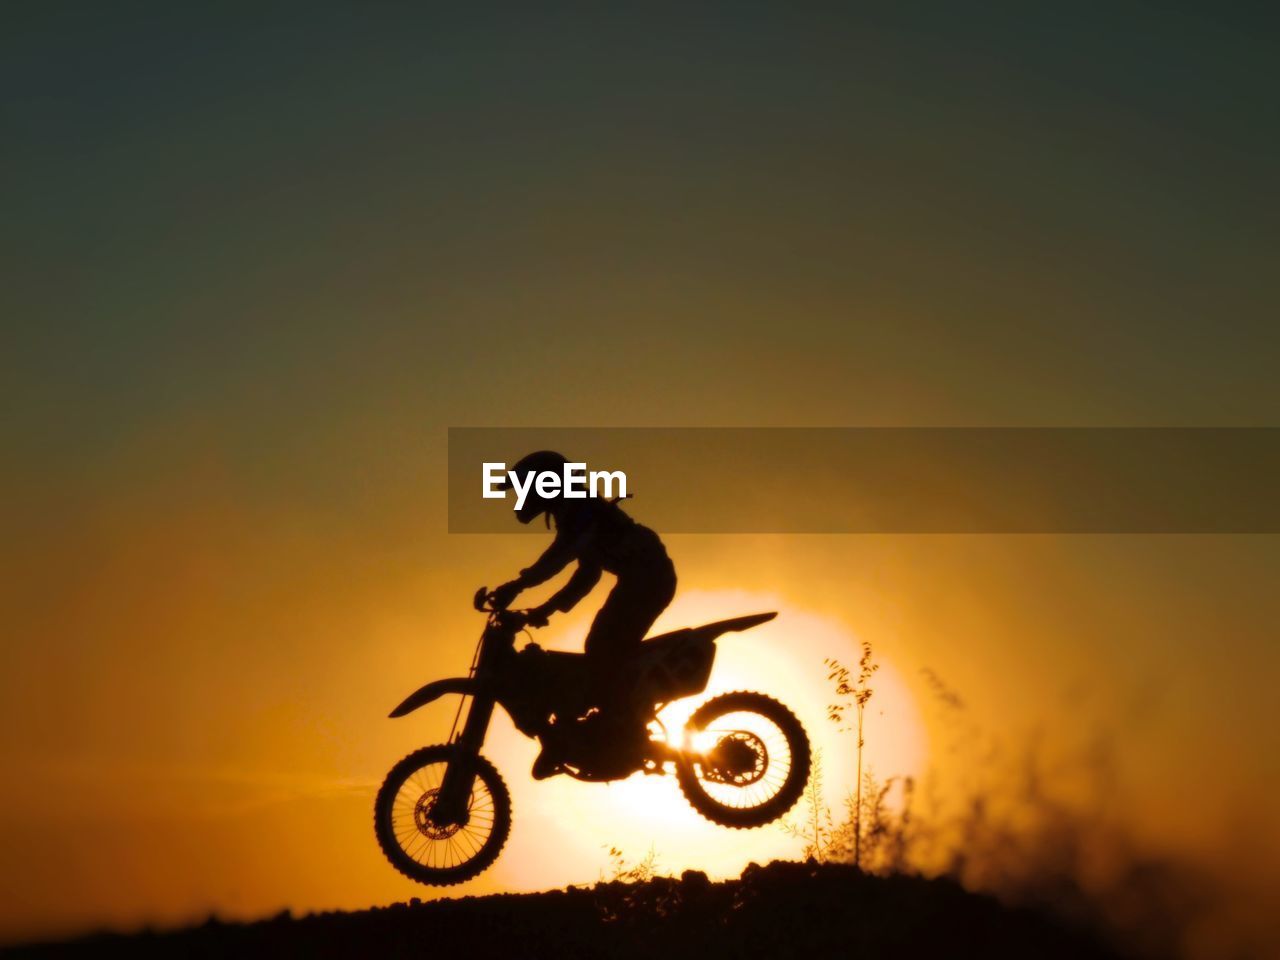 Silhouette man riding motorcycle against orange sky